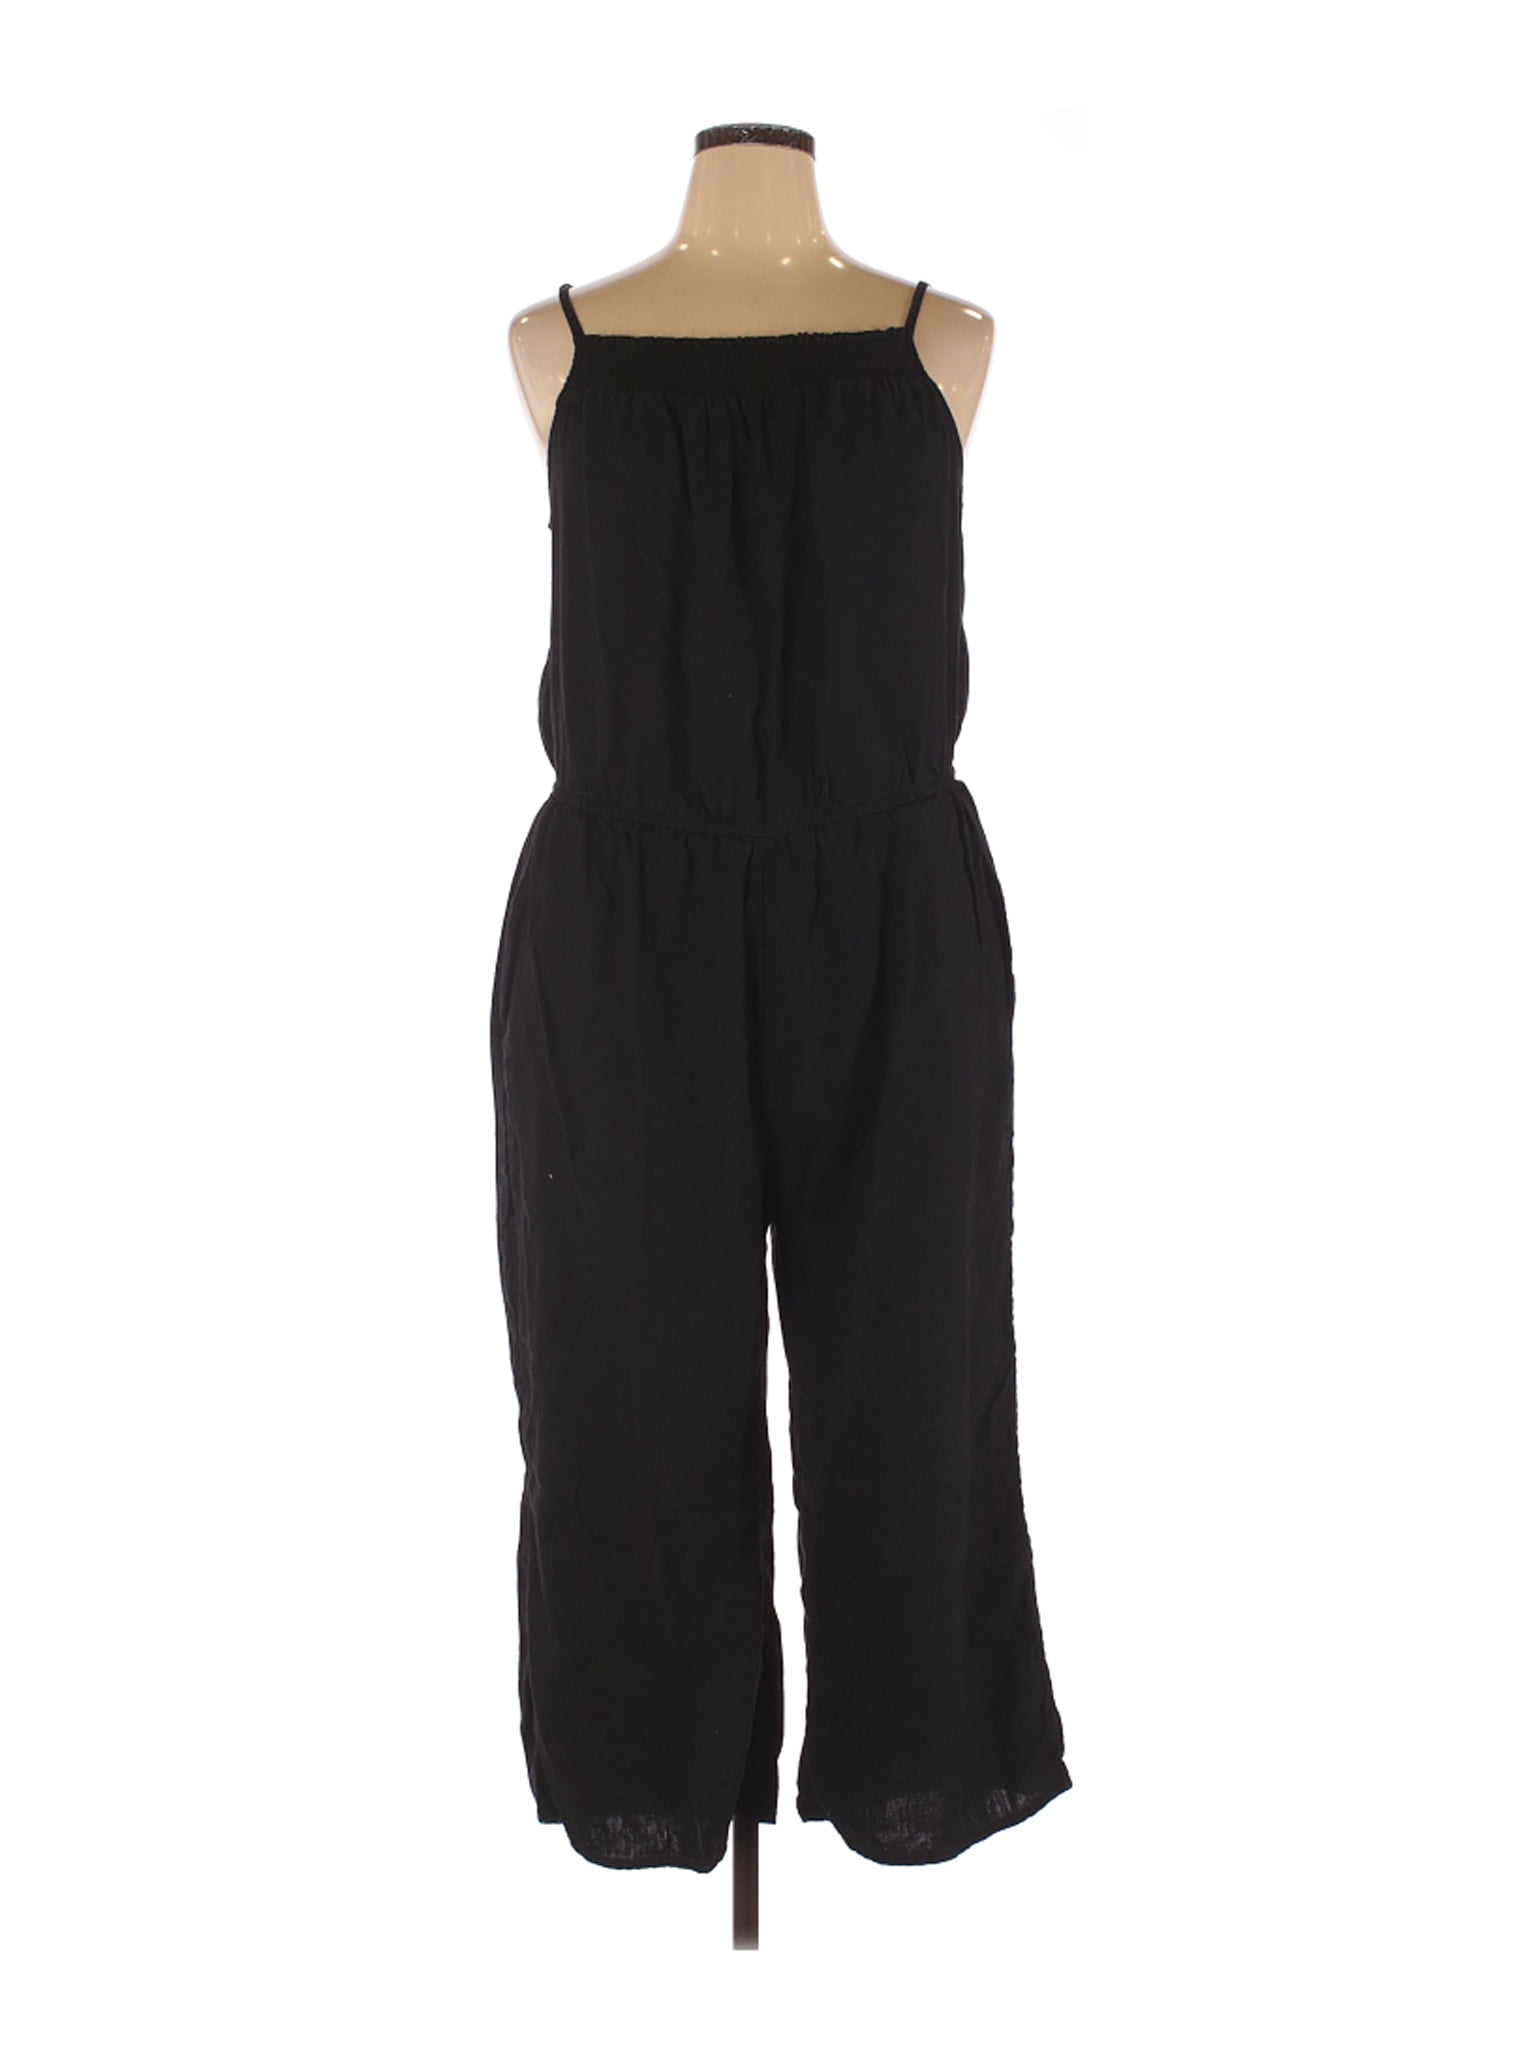 Old Navy - Pre-Owned Old Navy Women's Size XL Jumpsuit - Walmart.com ...